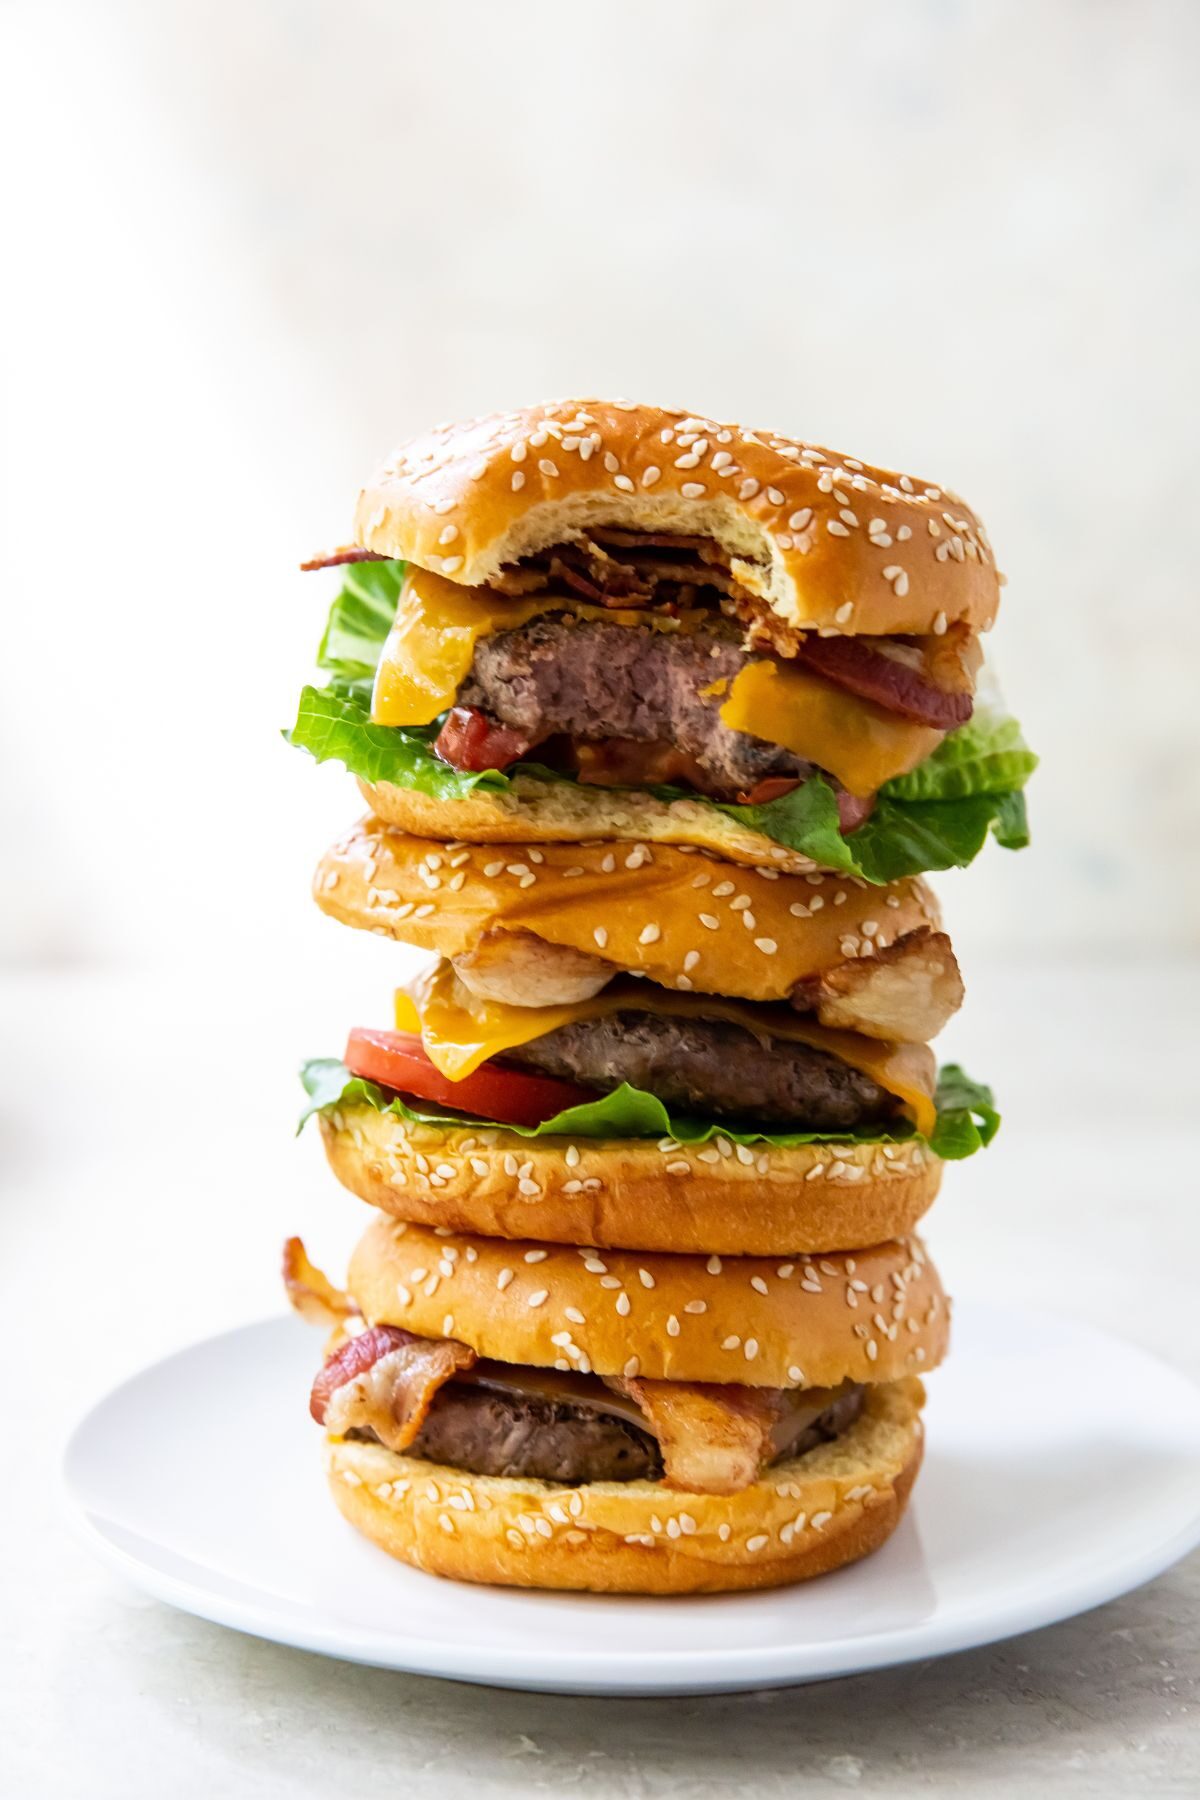 three burgers stacked together. top burger has a bite taken out of it.